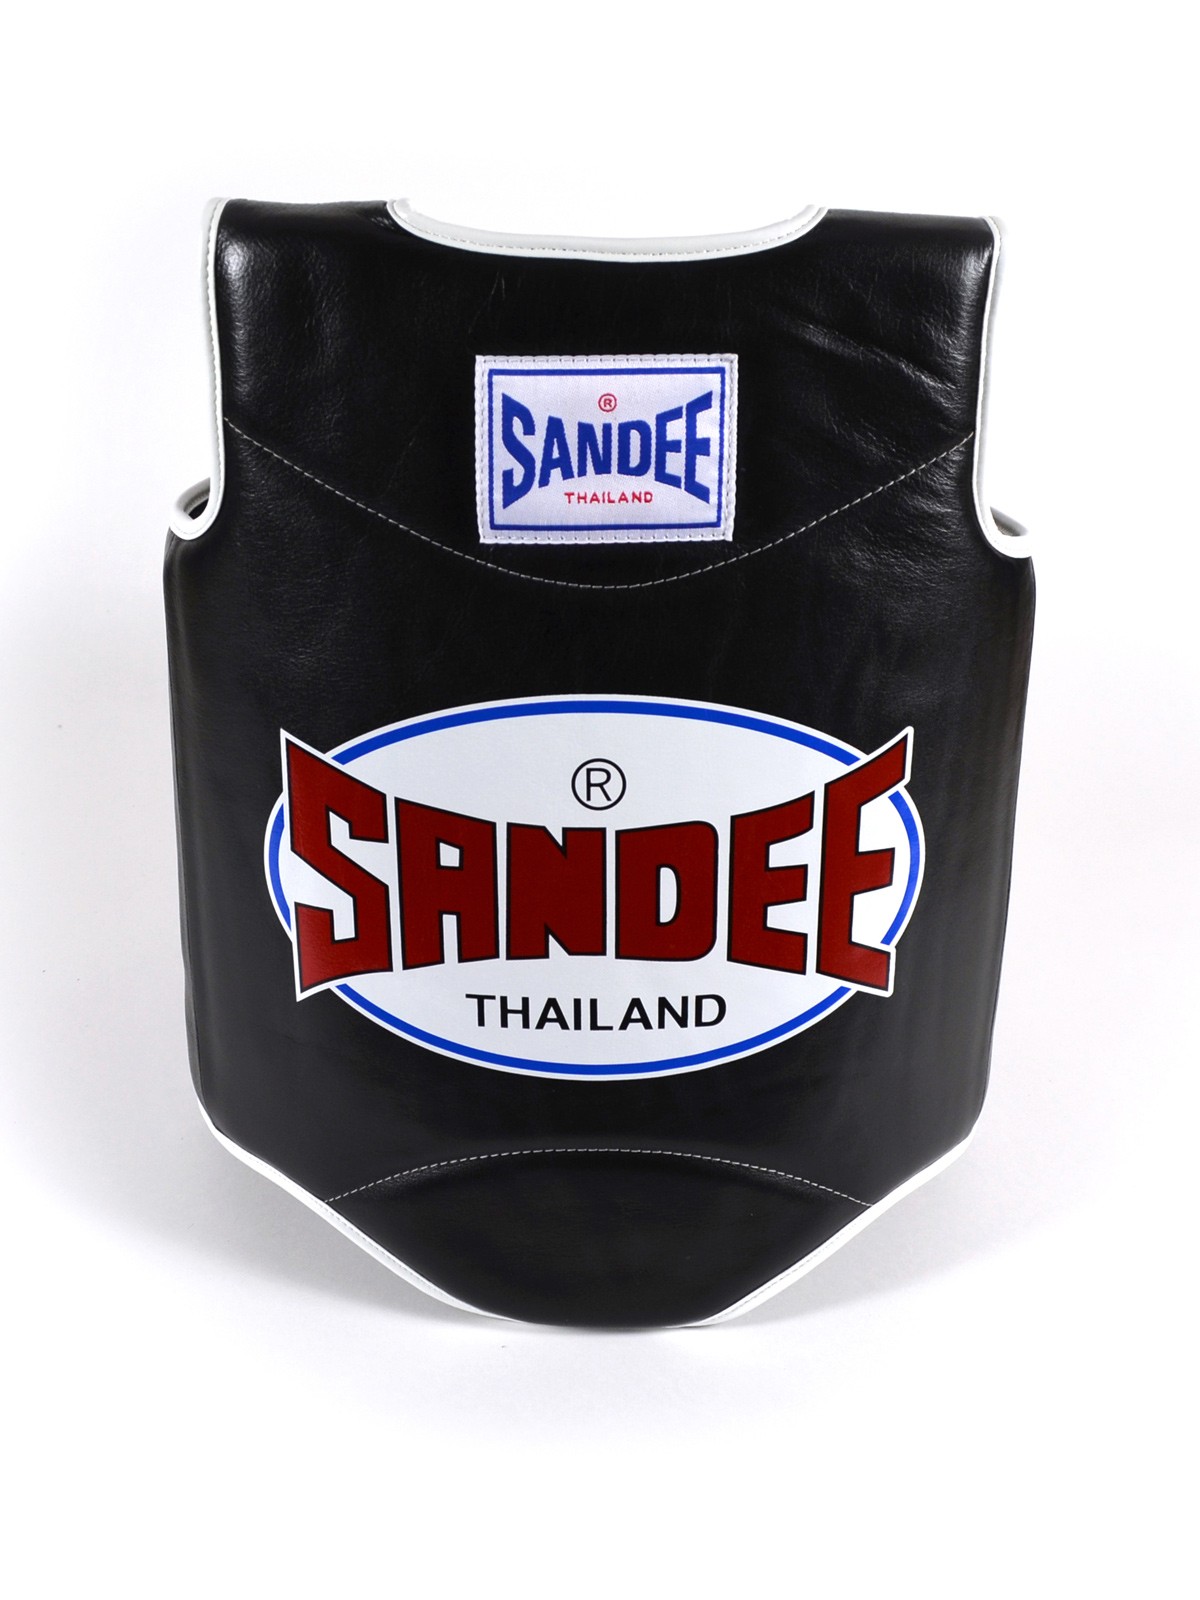 Sandee Body Shield Protection Muay Thai Boxing Synthetic Leather Black White